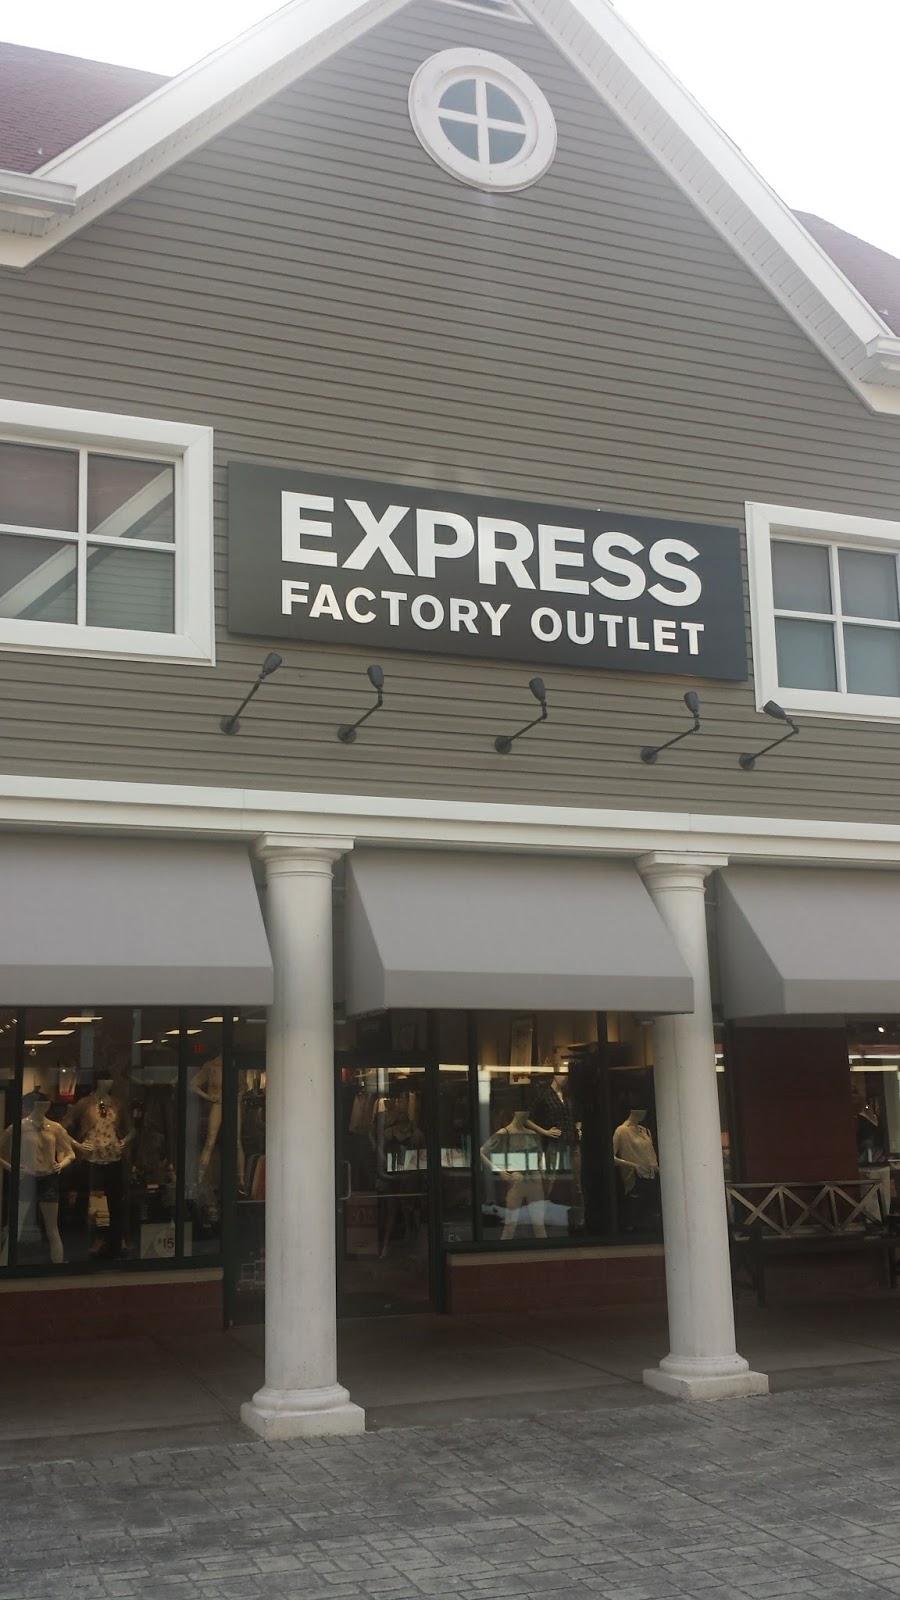 Express Factory Outlet | 20 Killingworth Turnpike, Clinton, CT 06413 | Phone: (860) 664-3986